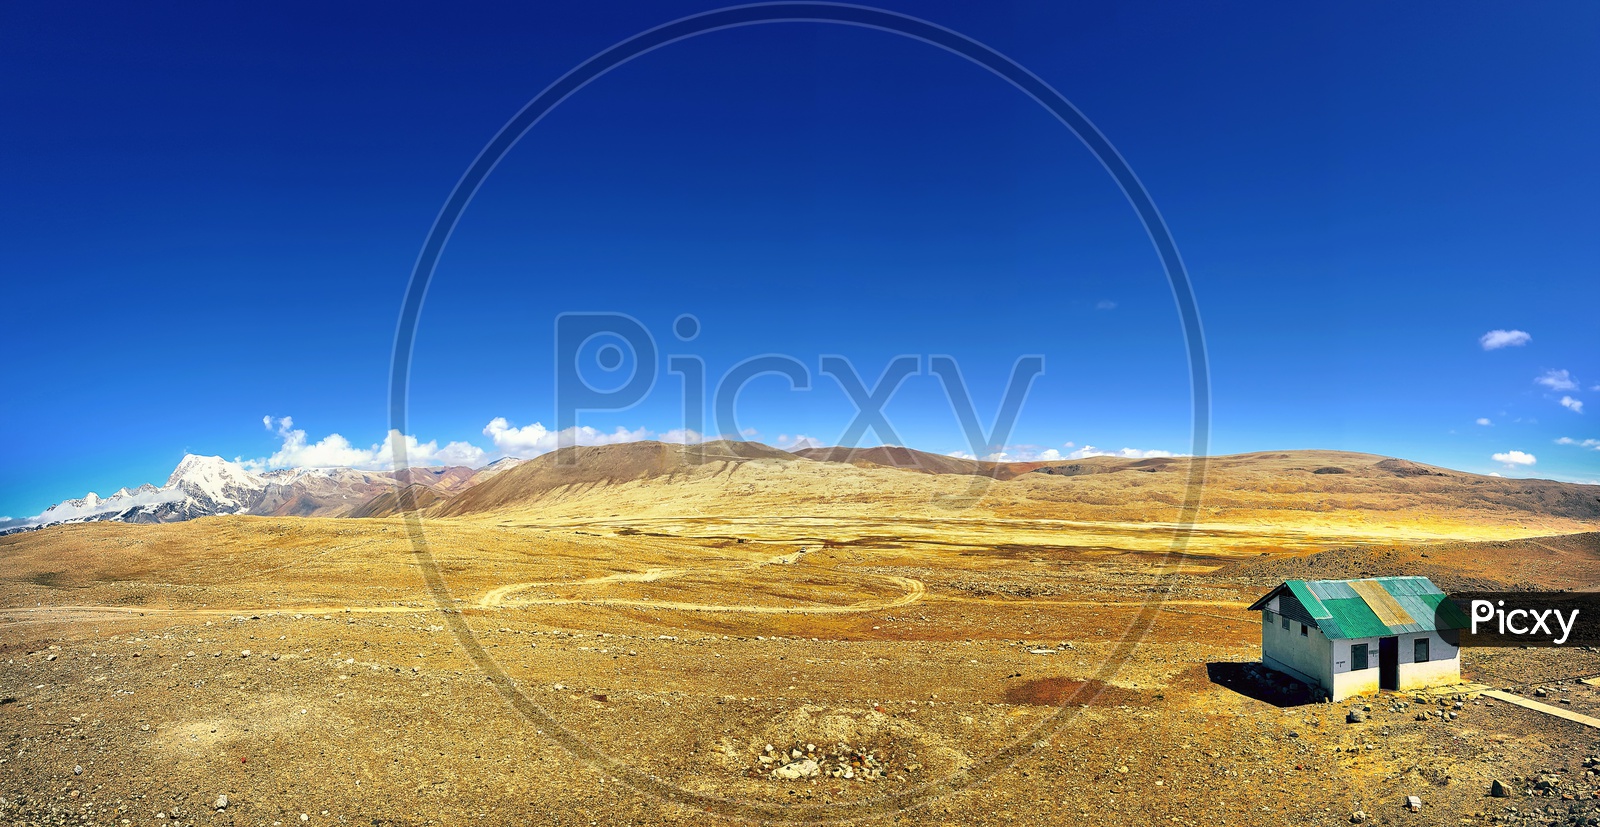 A House On A Deserted Land With Arid Soil And Blue Sky